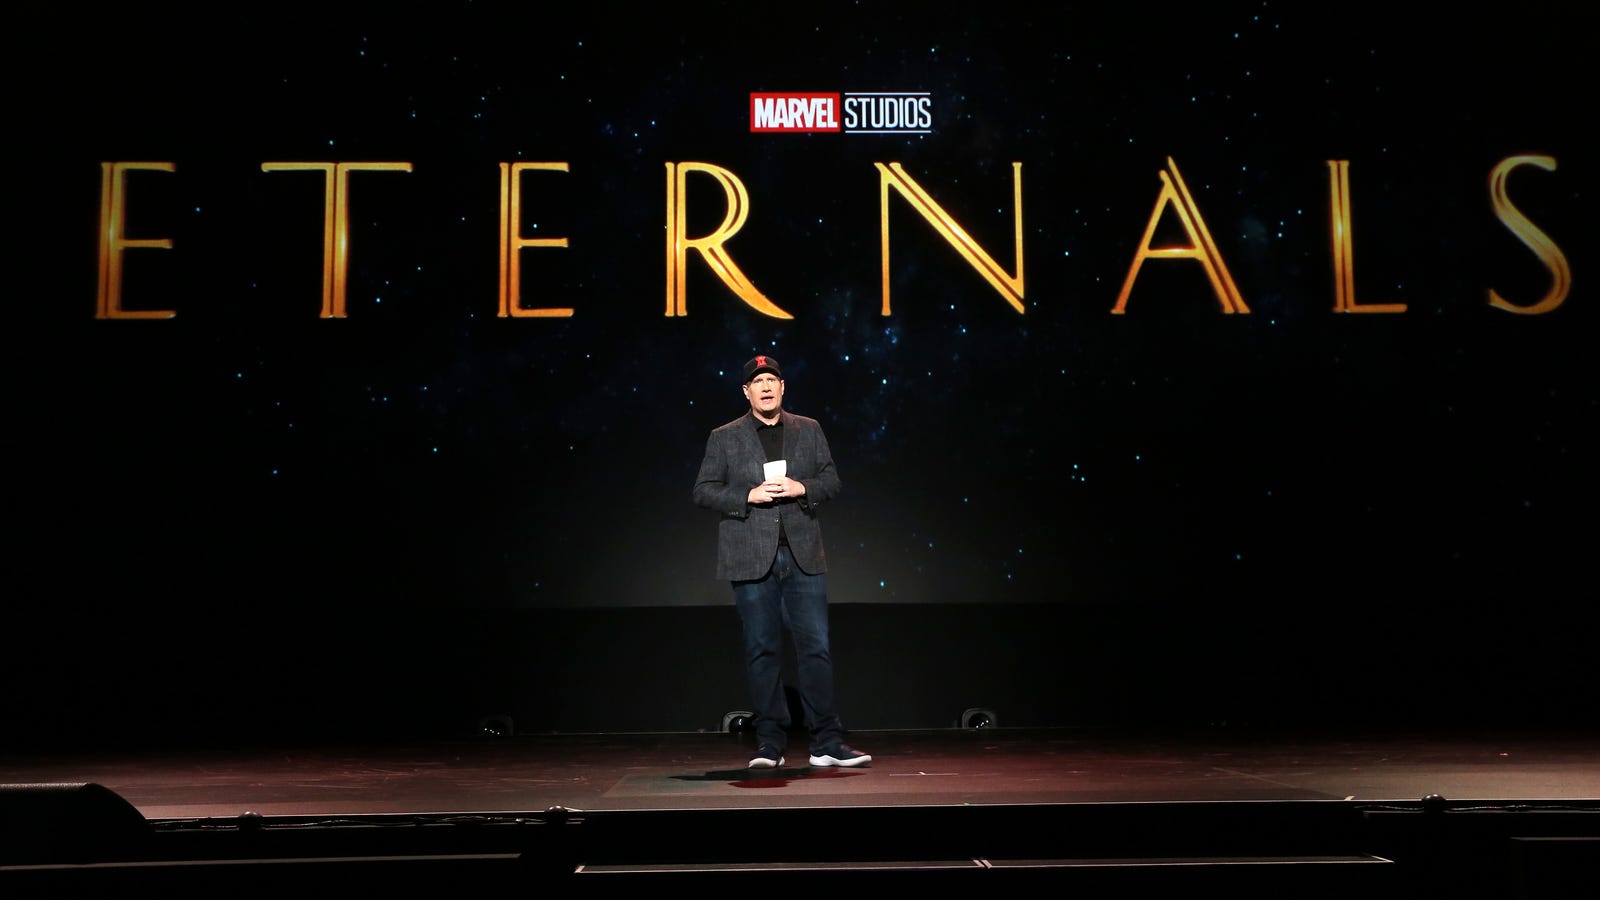 Marvel S First Gay Character Will Be In Eternals Not Thor 4